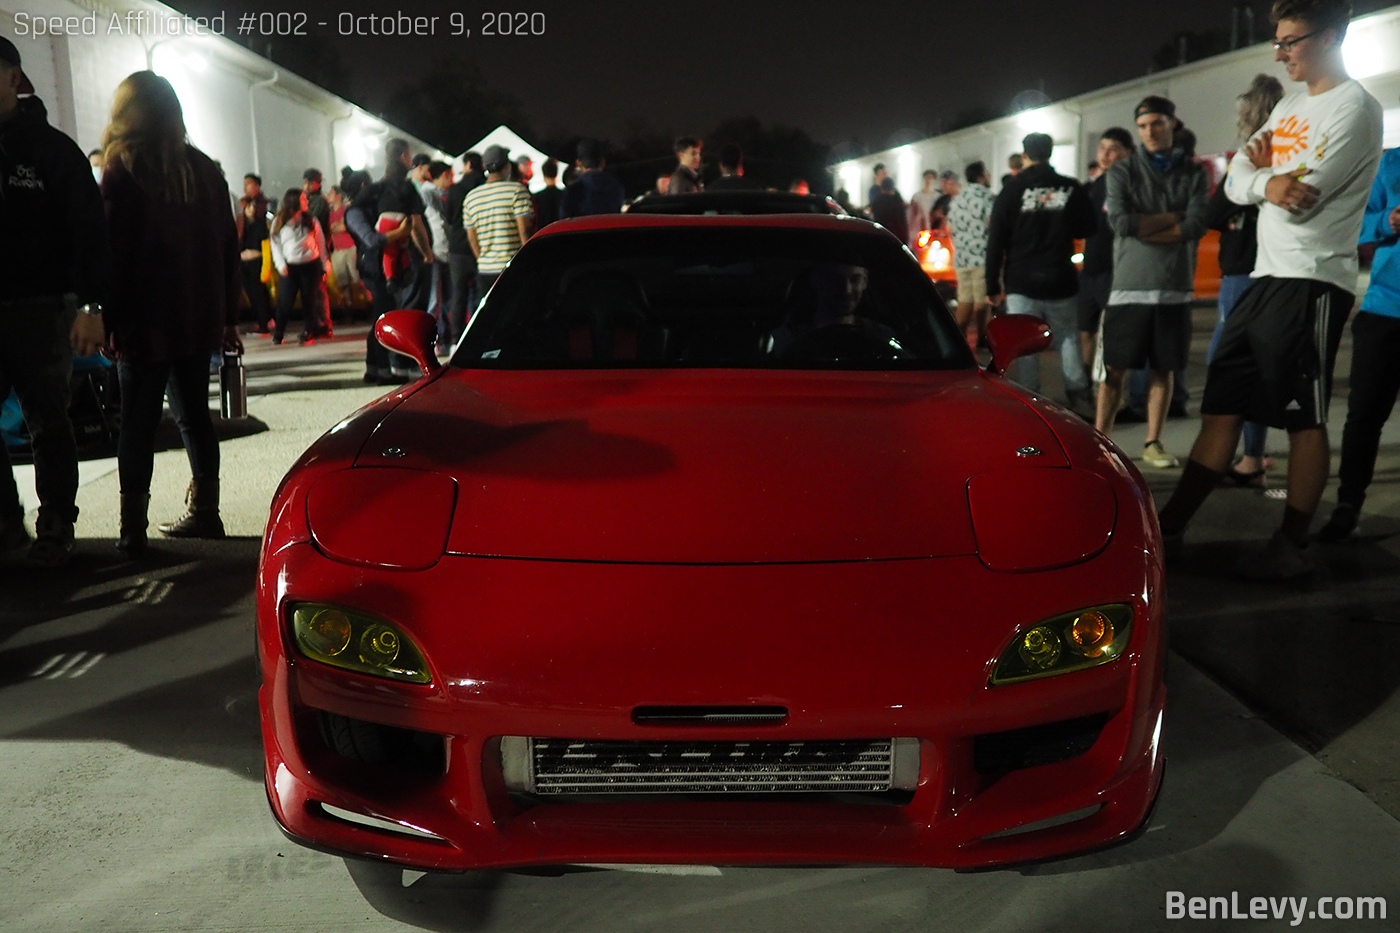 Red FD RX-7 at Speed Affiliated #002